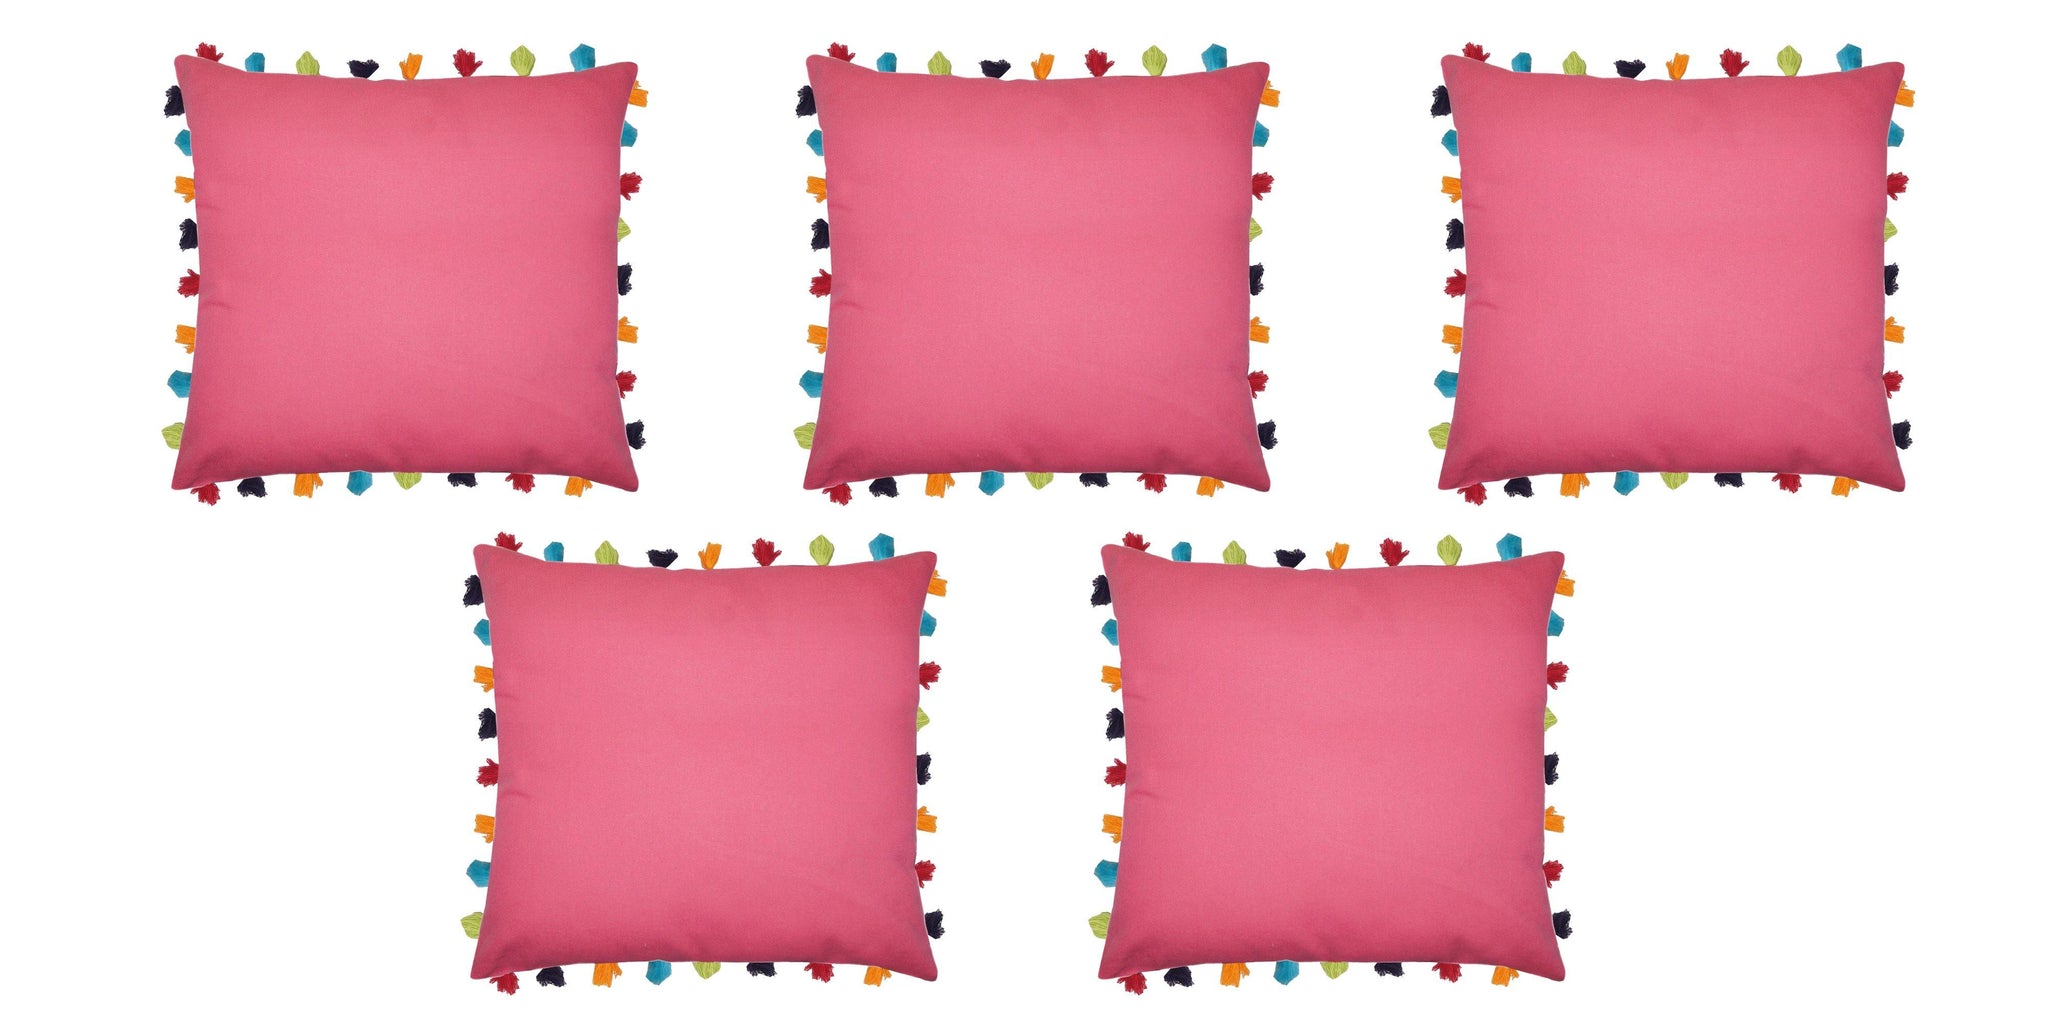 Lushomes Rasberry Cushion Cover with Colorful tassels (5 pcs, 24 x 24”) - Lushomes